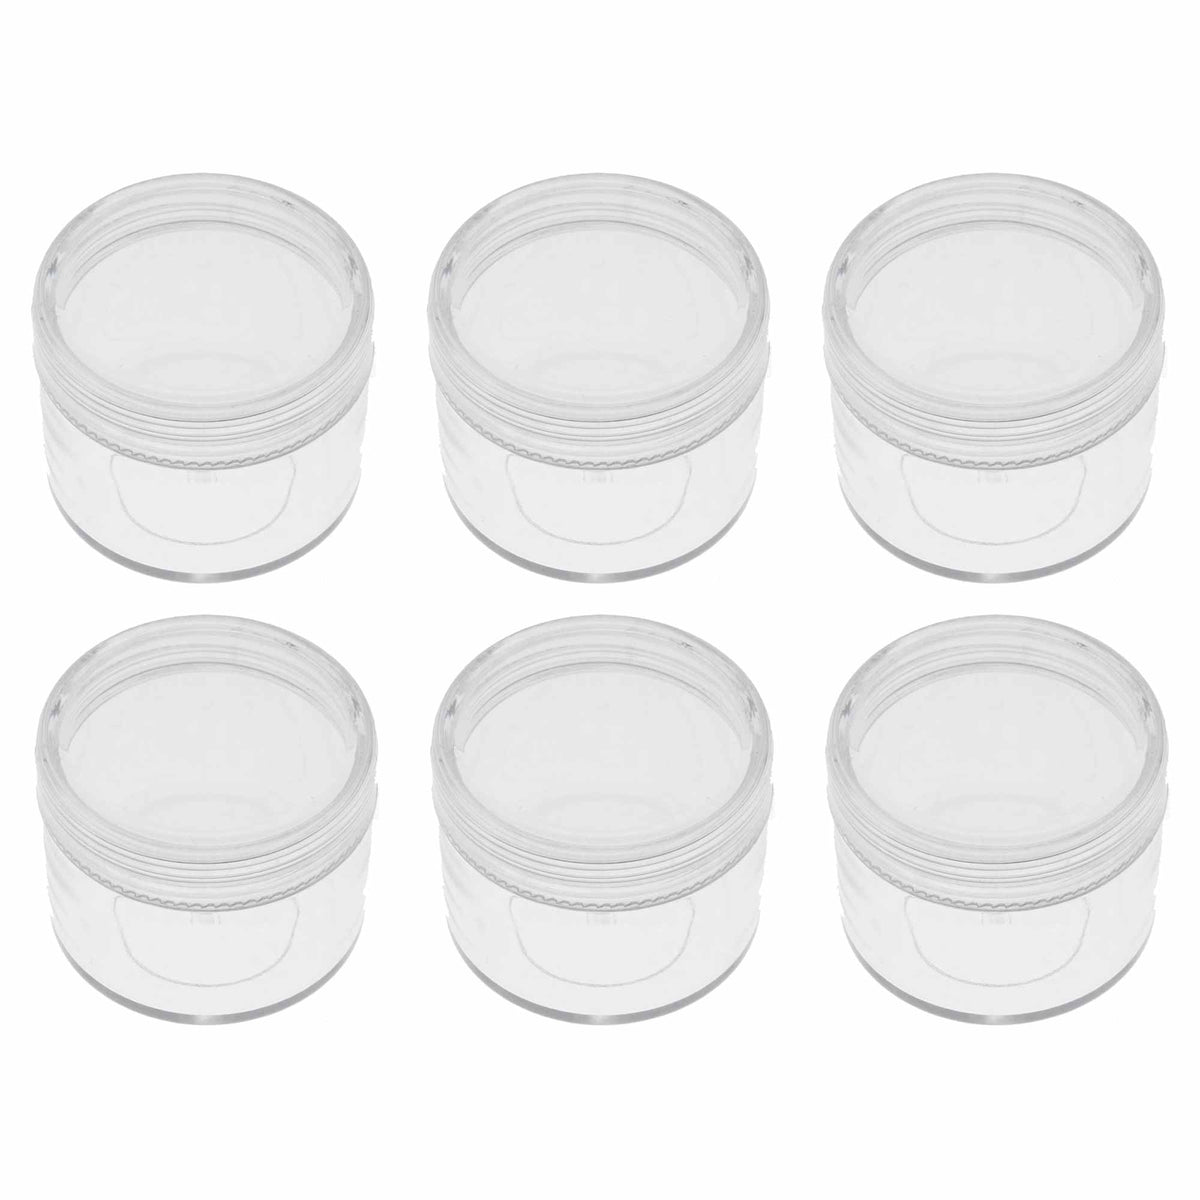 Snapware Plastic Small Round Containers - 2 Pack - Transparent, 1.2 c -  Ralphs